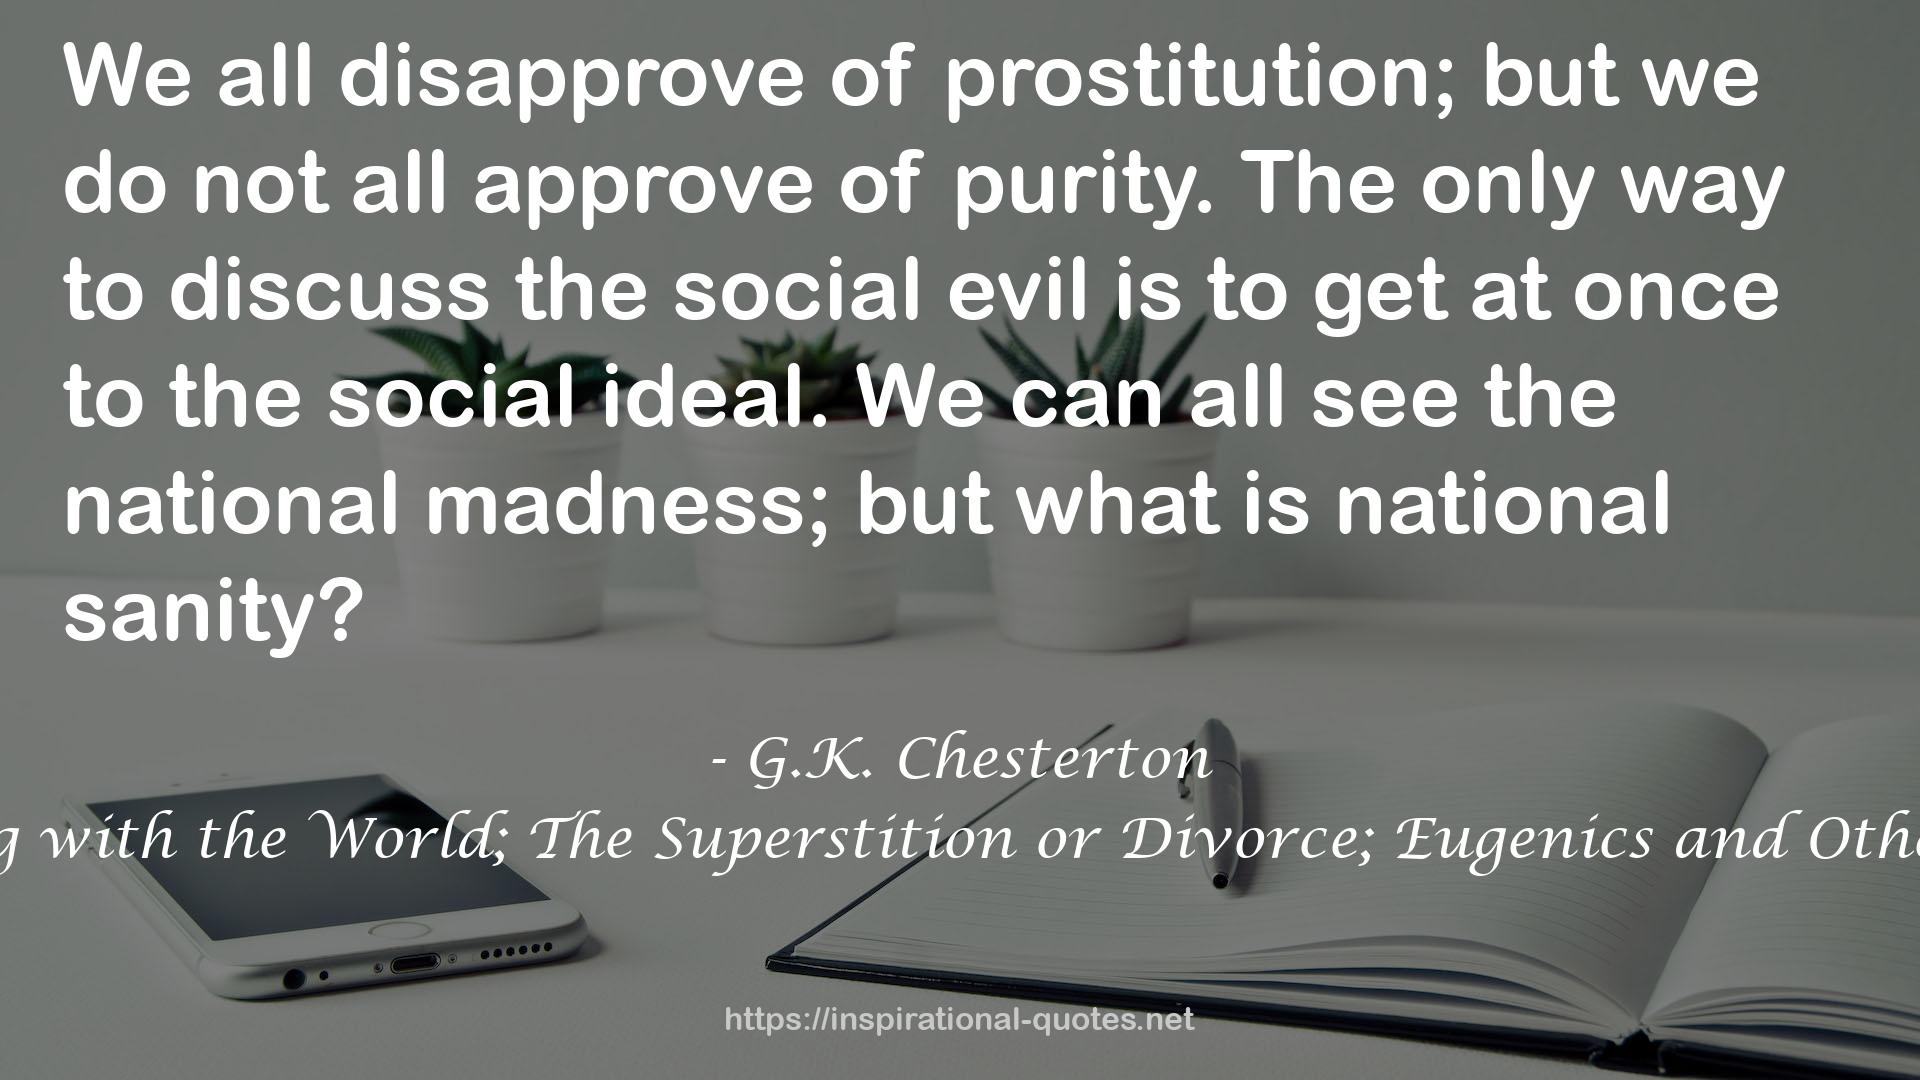 The Collected Works of G.K. Chesterton Volume 04: What's Wrong with the World; The Superstition or Divorce; Eugenics and Other Evils; Divorce vs. Democracy; Social Reform vs. Birth Control QUOTES